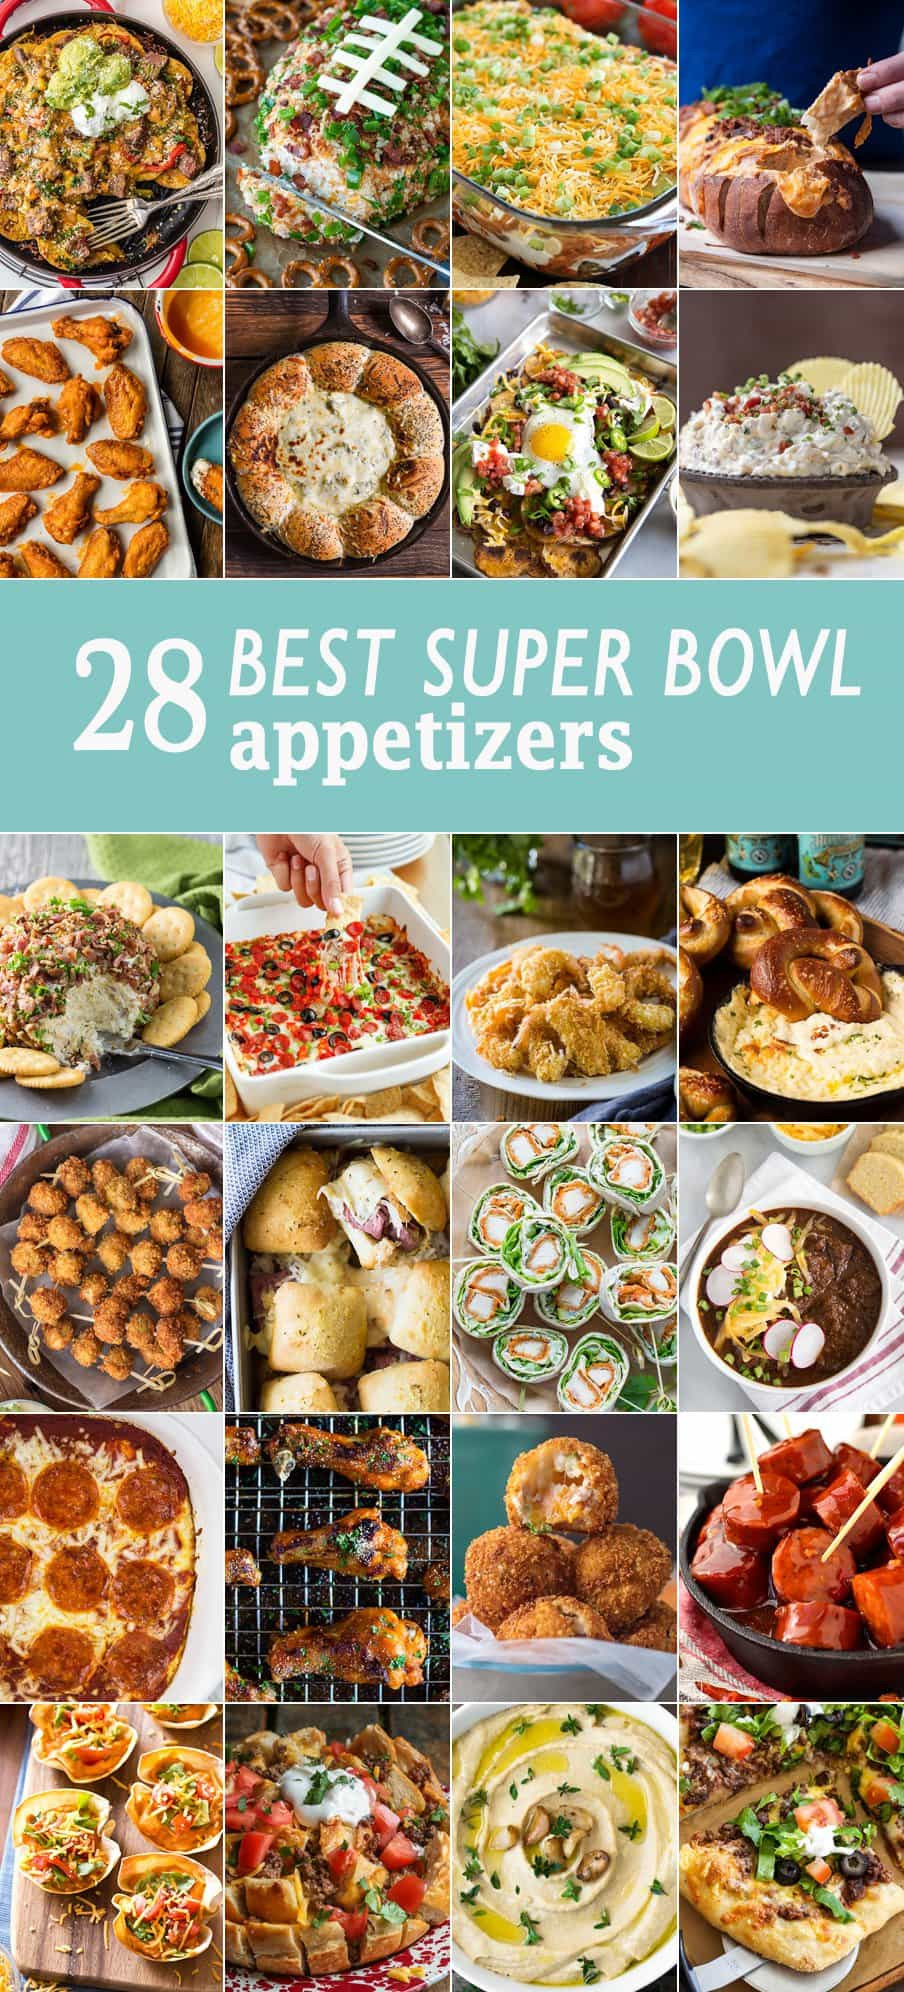 Super Bowl Snacks Recipes And Ideas
 10 Best Super Bowl Appetizers The Cookie Rookie